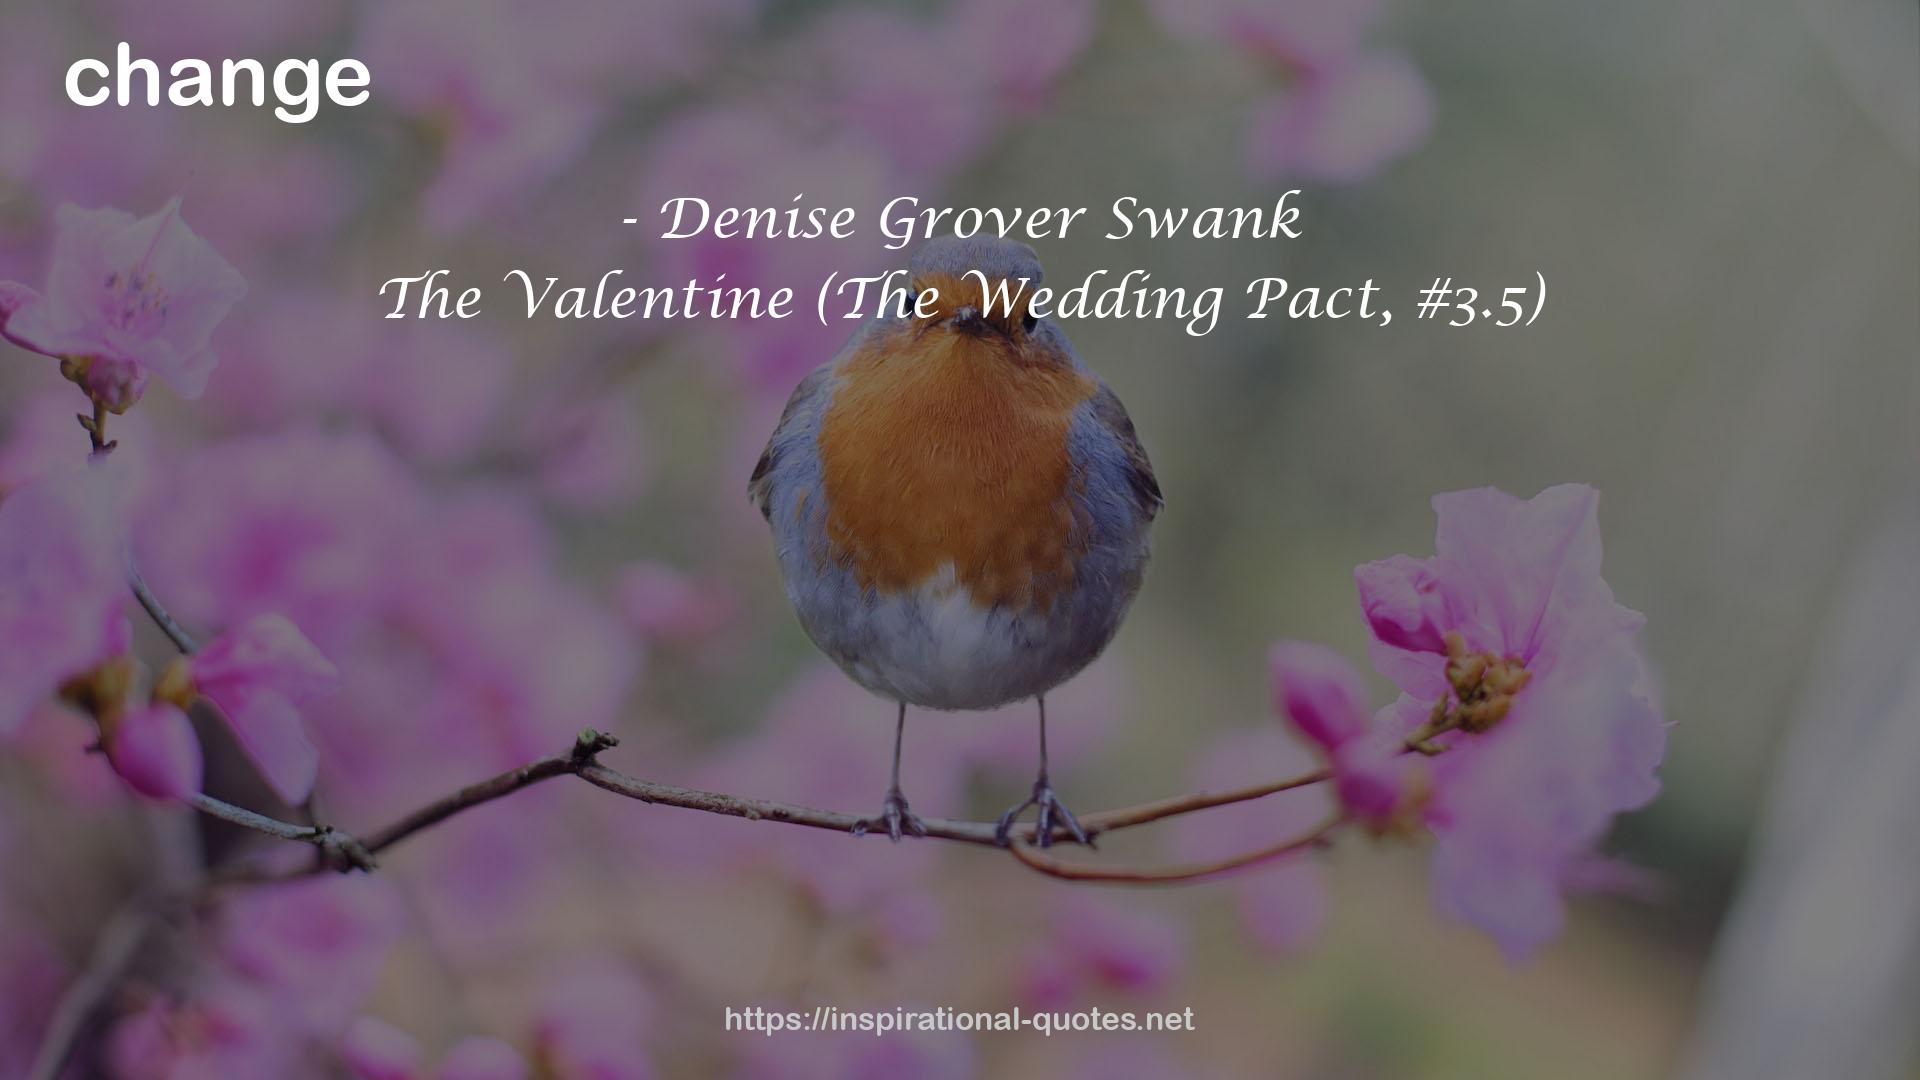 The Valentine (The Wedding Pact, #3.5) QUOTES